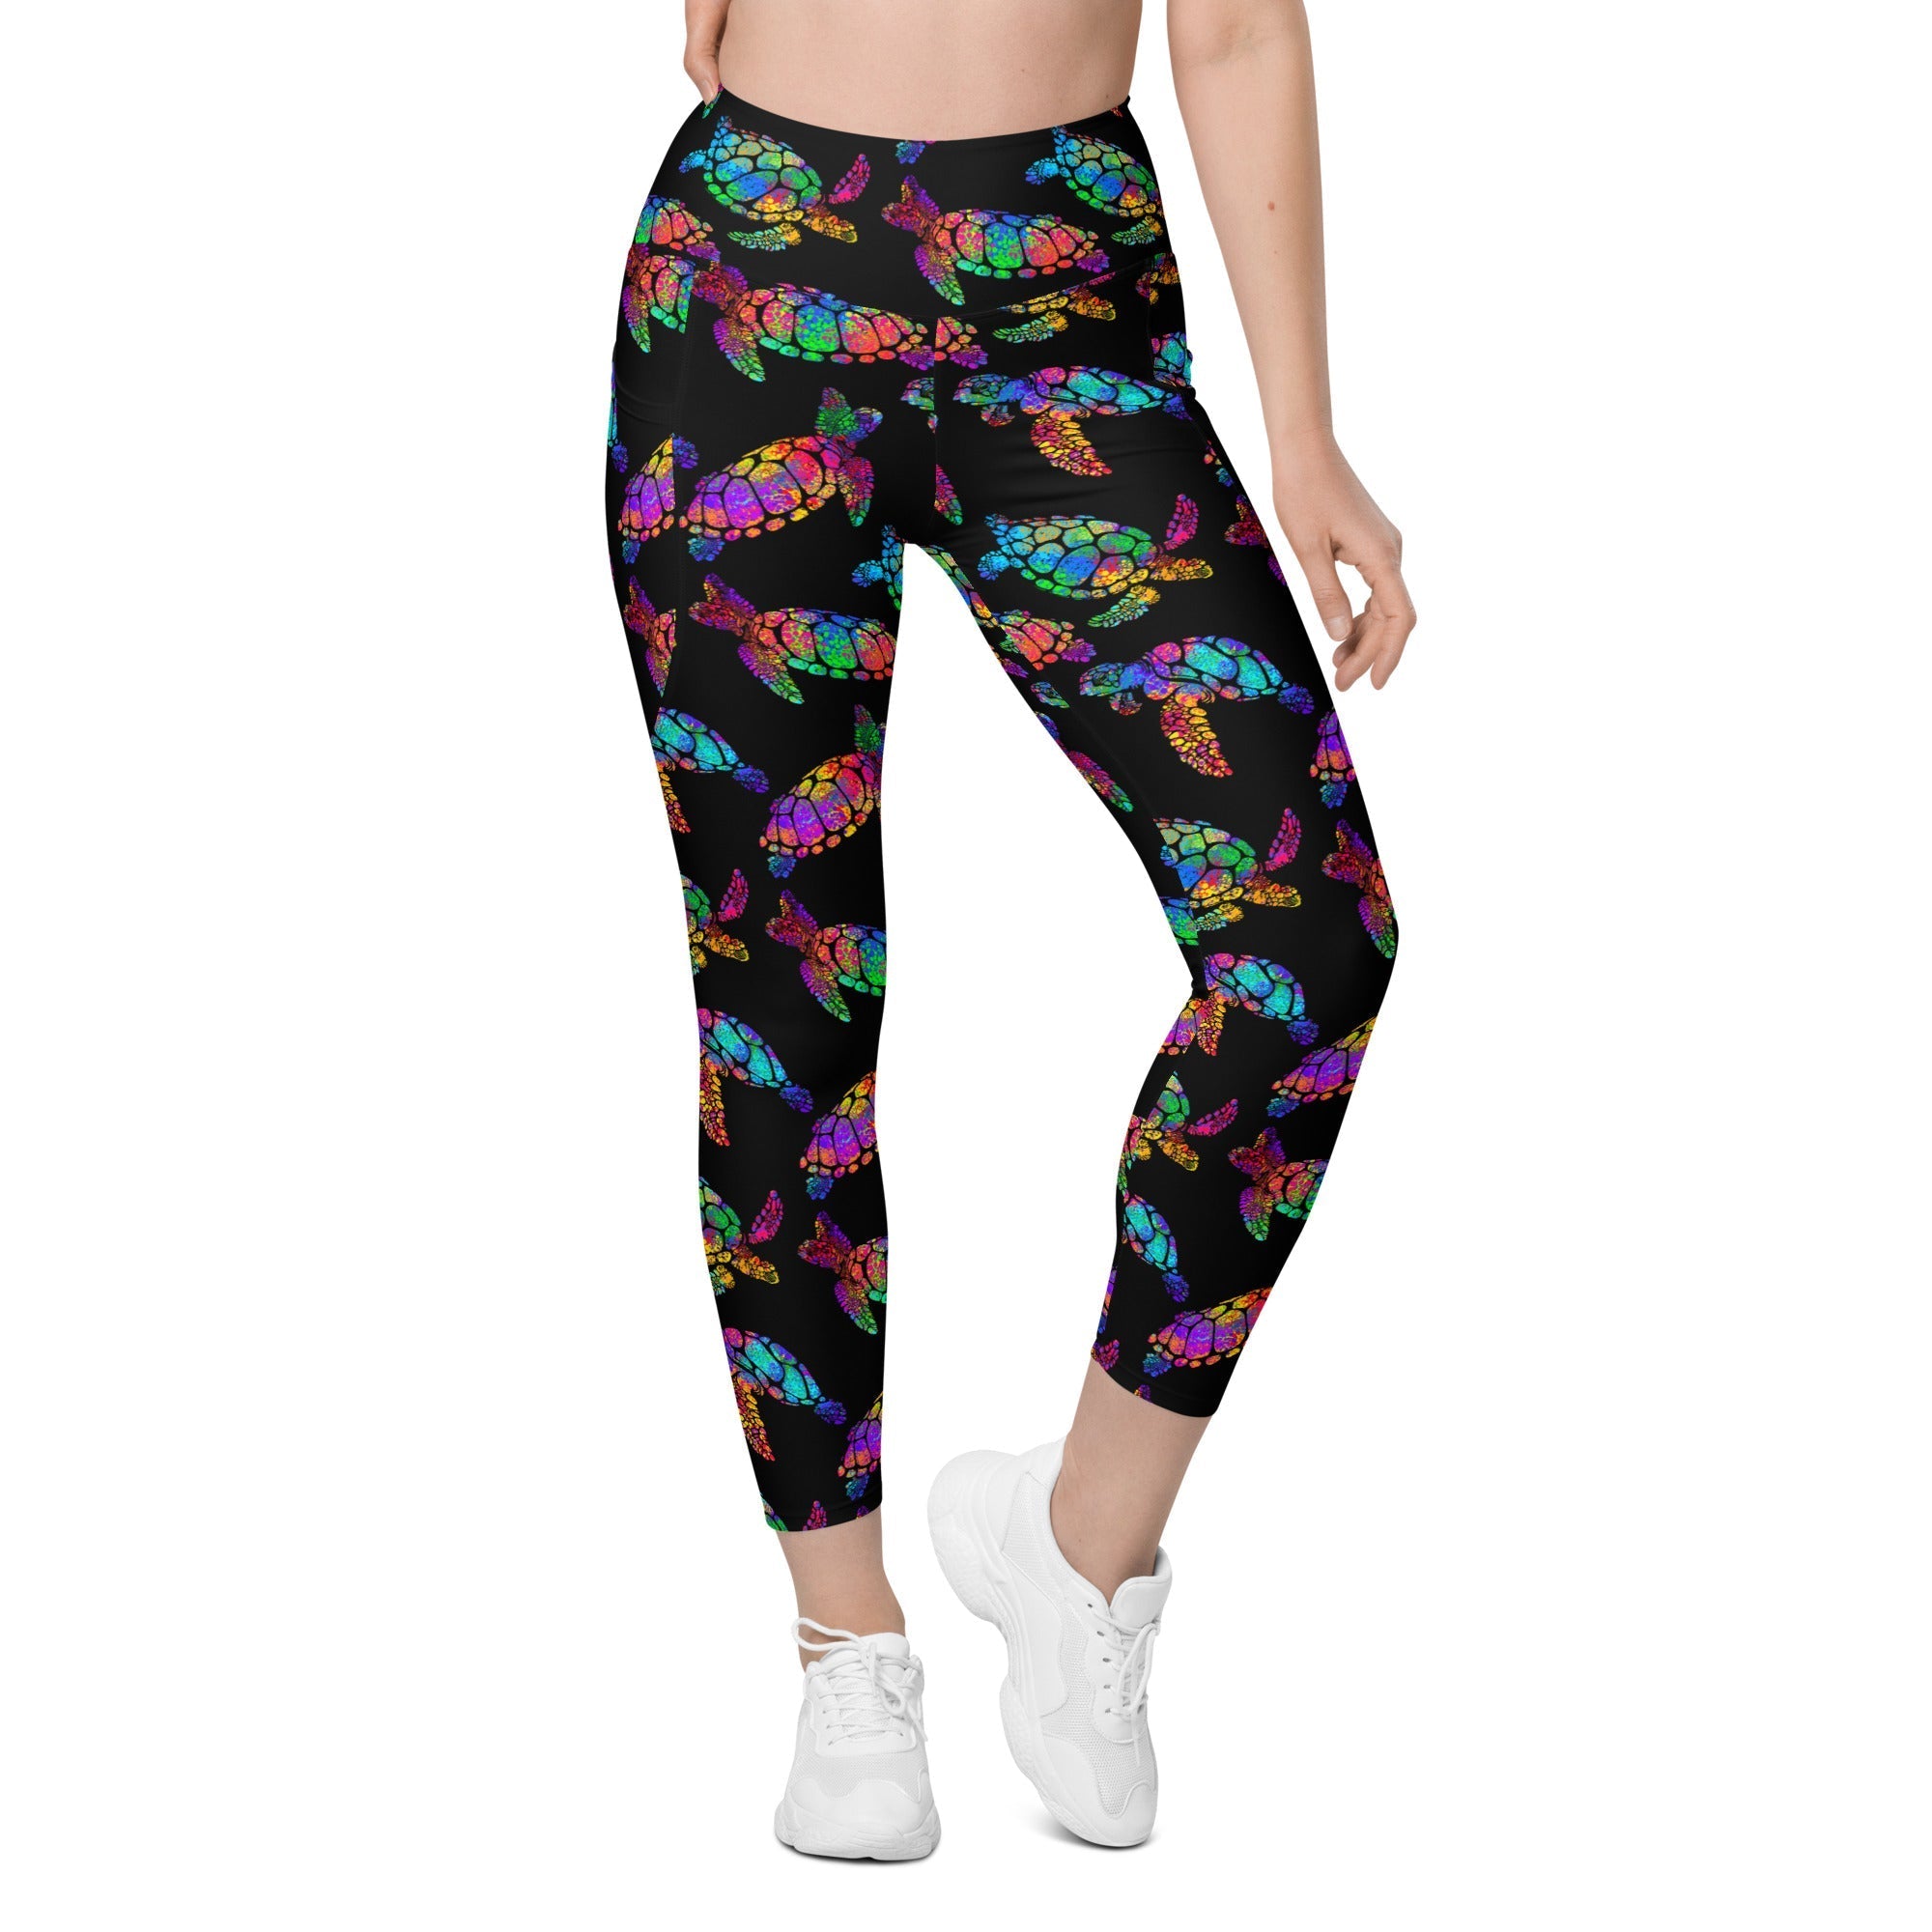 Turtle Leggings With Pockets